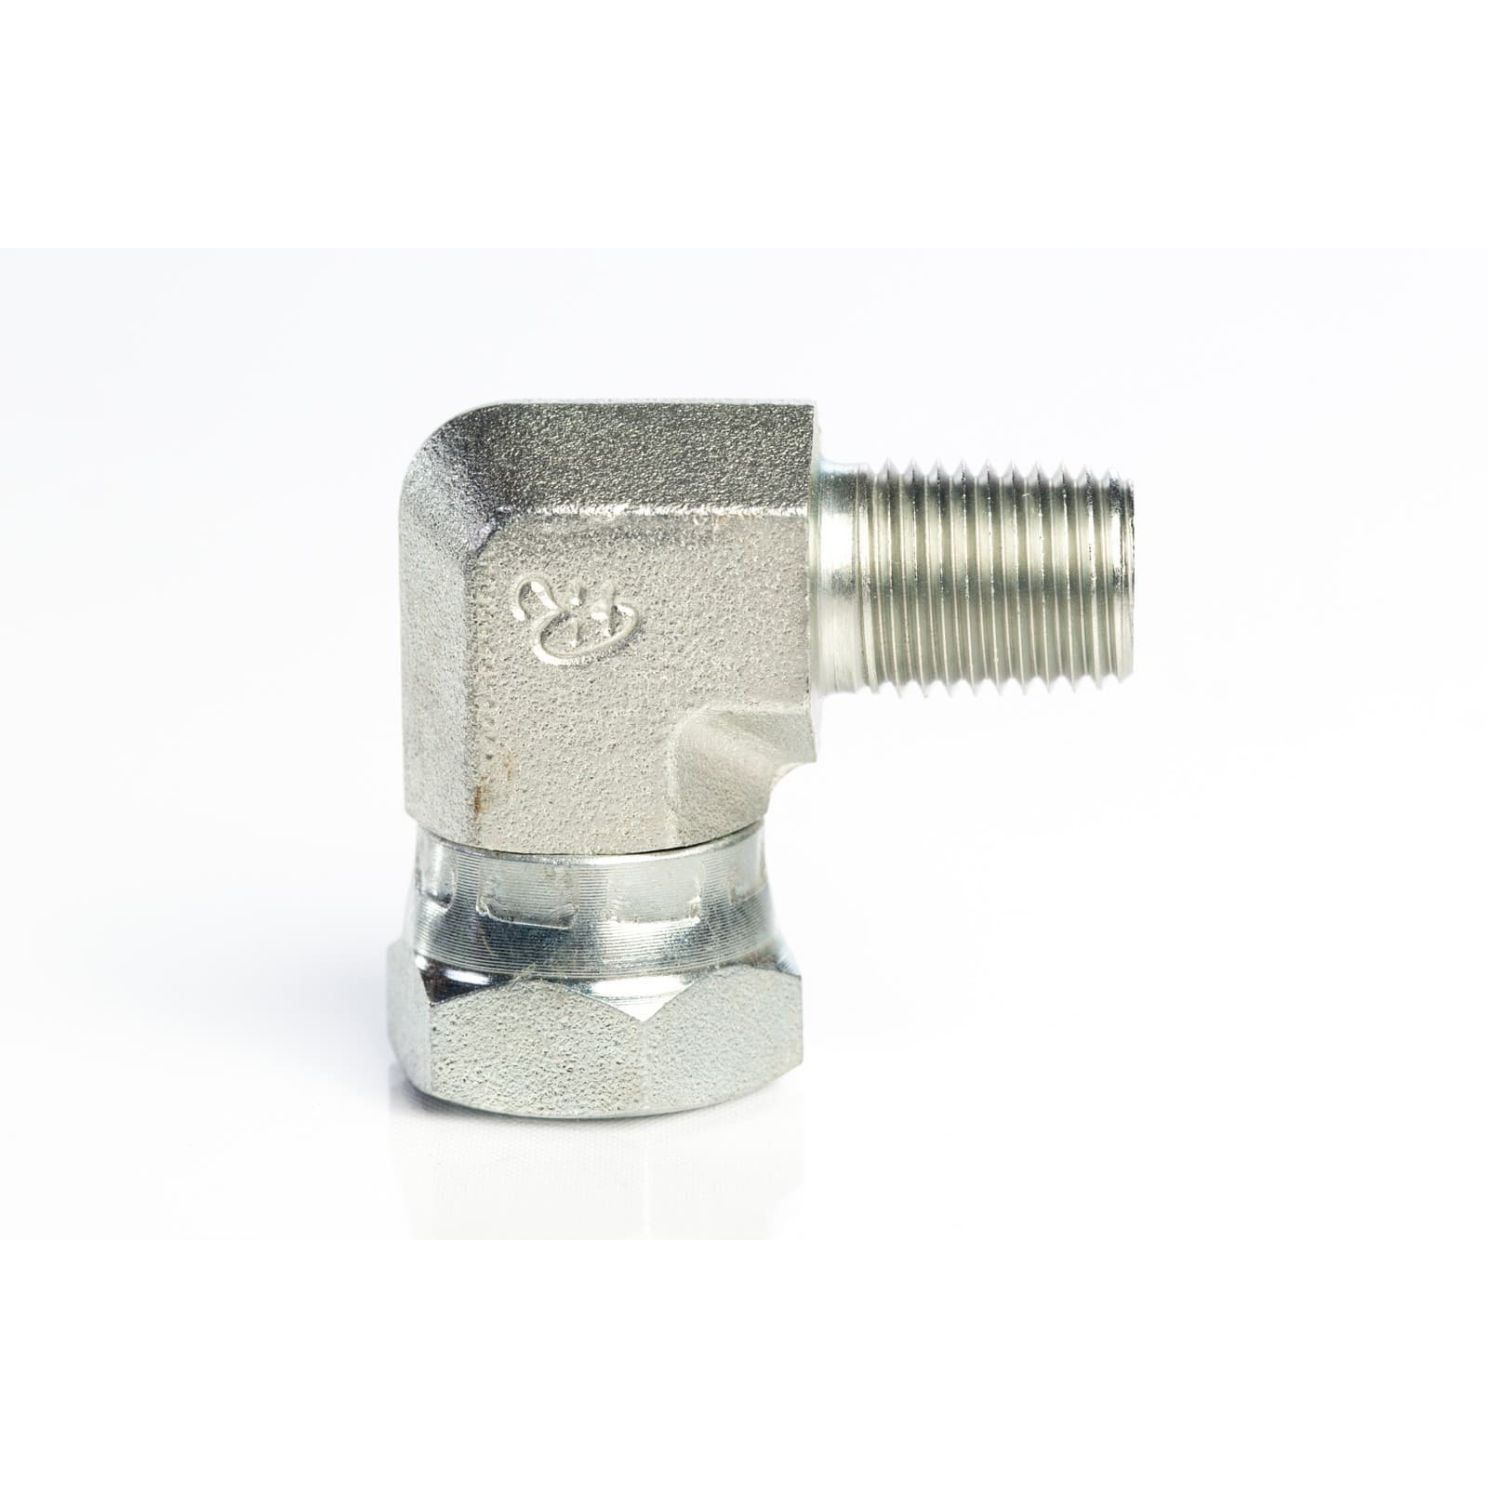 Tompkins 1501-4-6 Steel Hydraulic Adapter Fitting